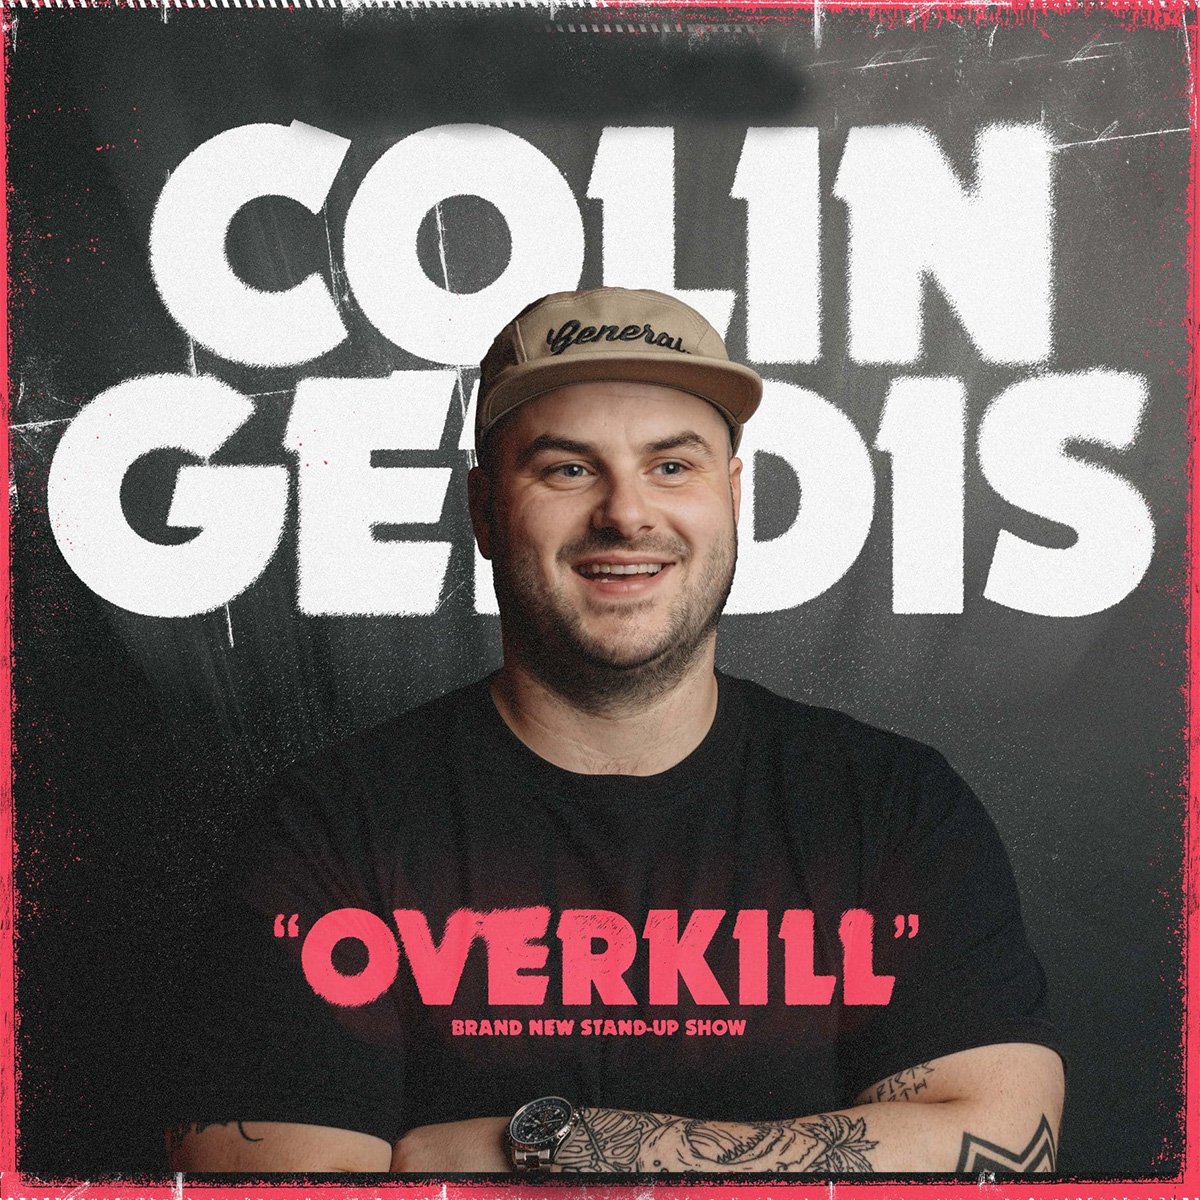 Comedy powerhouse Colin Geddis brings his brand new show “OVERKILL” on tour around Ireland this spring. He takes his show to The Spirit Store stage for 2 nights in April. Sunday 7th April is S0LD 0UT Sunday 14th April Limted Tickets available from spiritstore.ie/event.php?even…